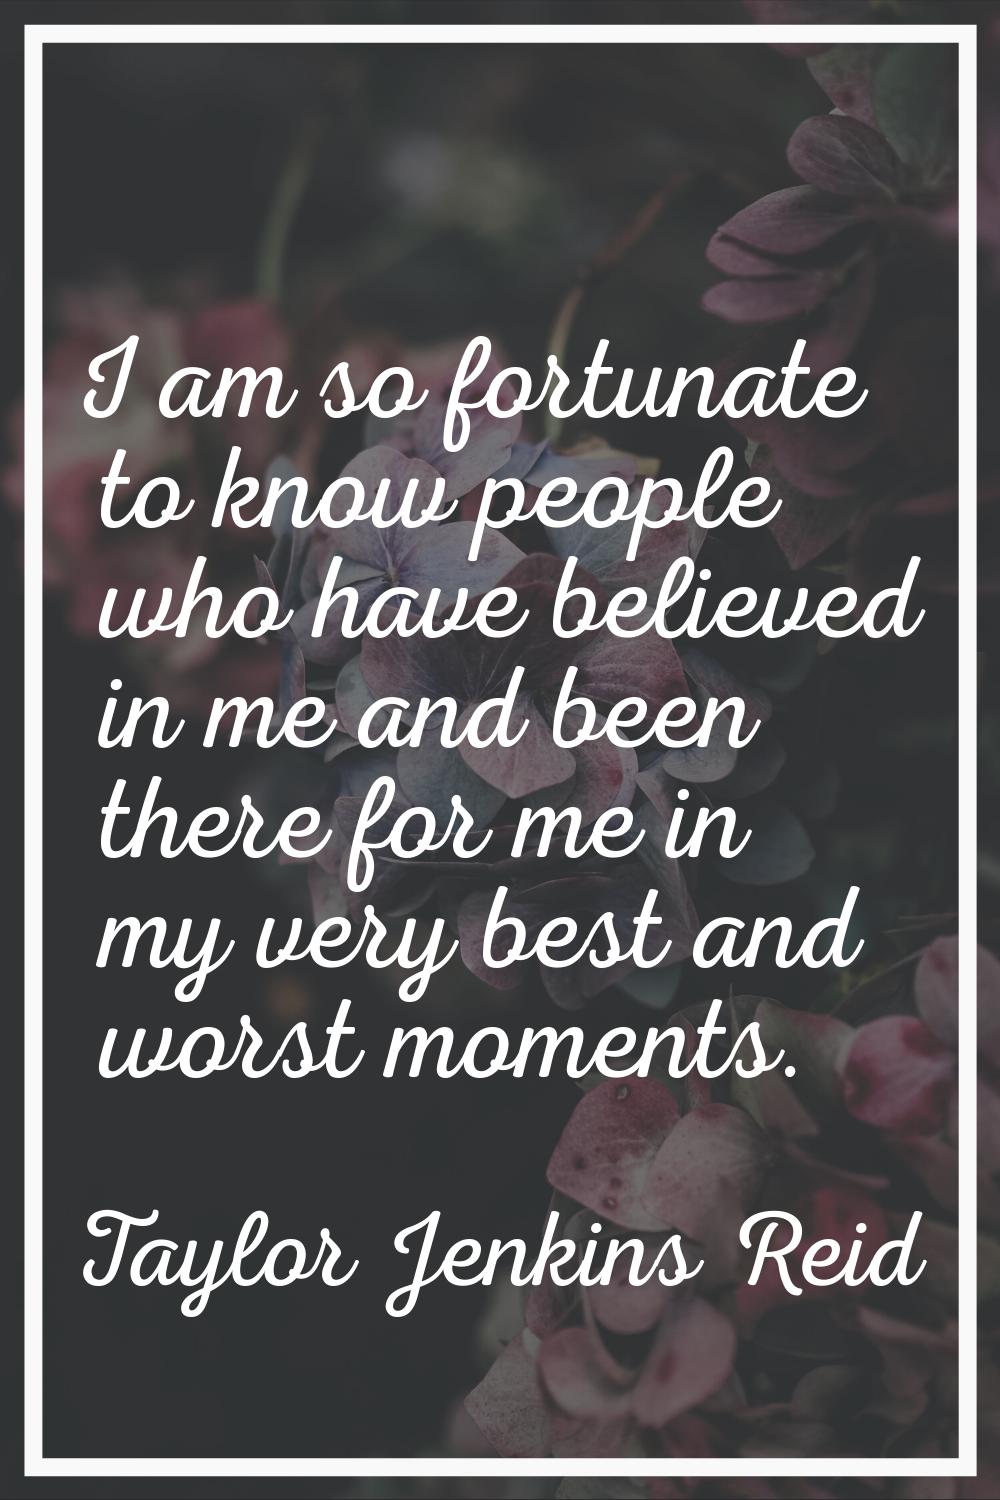 I am so fortunate to know people who have believed in me and been there for me in my very best and 